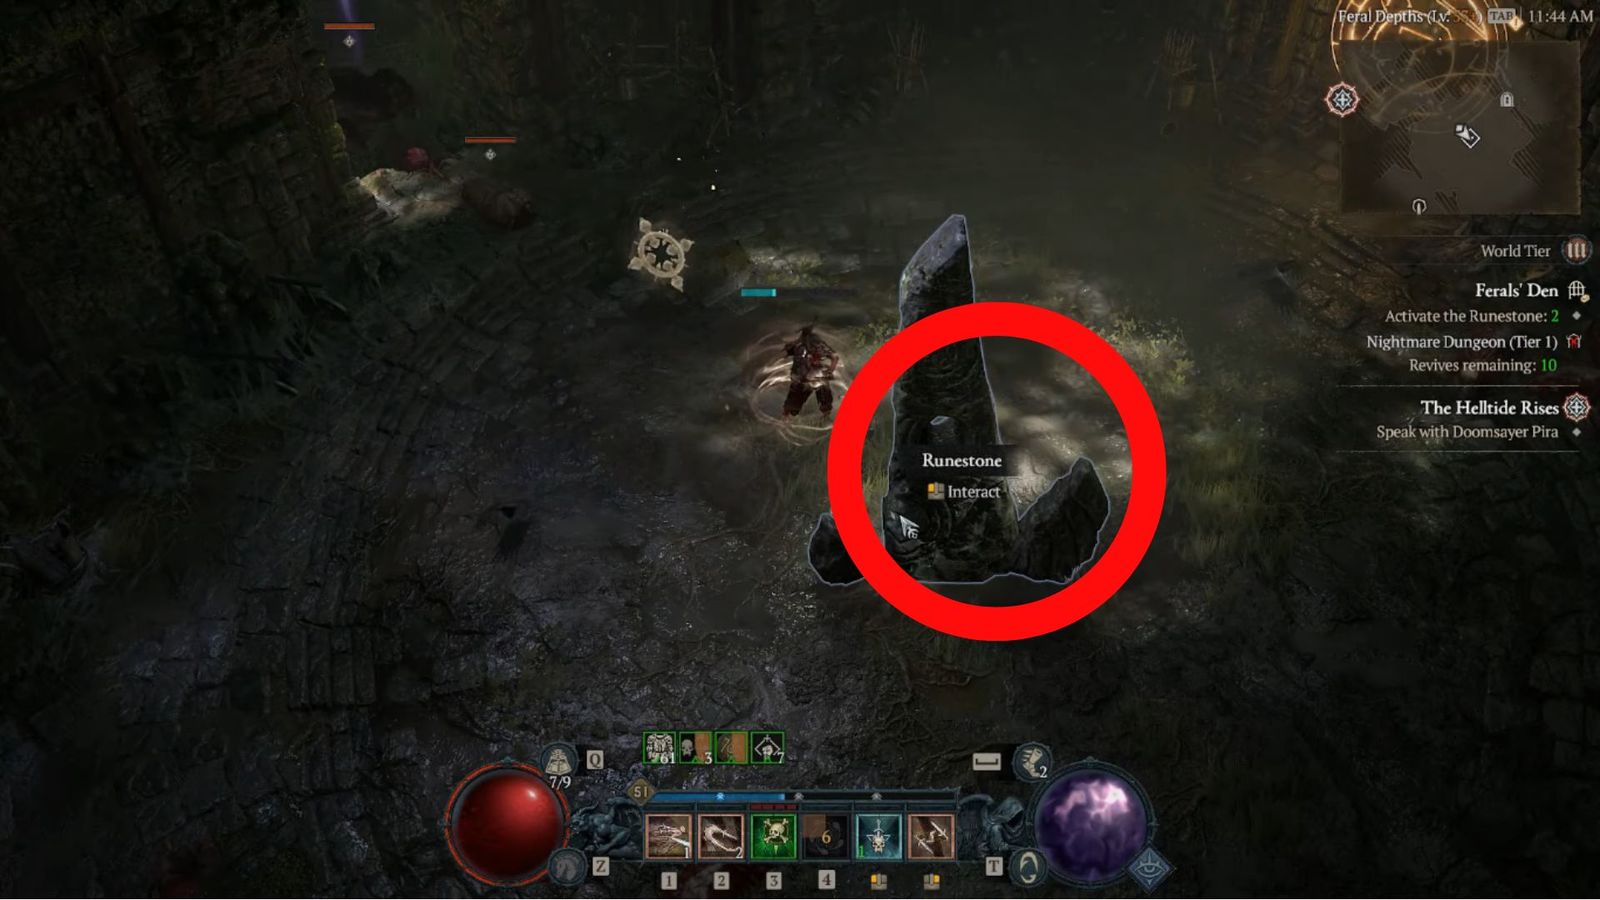 A screenshot of the Feral's Den quest with Activate Runestone objective in Diablo 4.